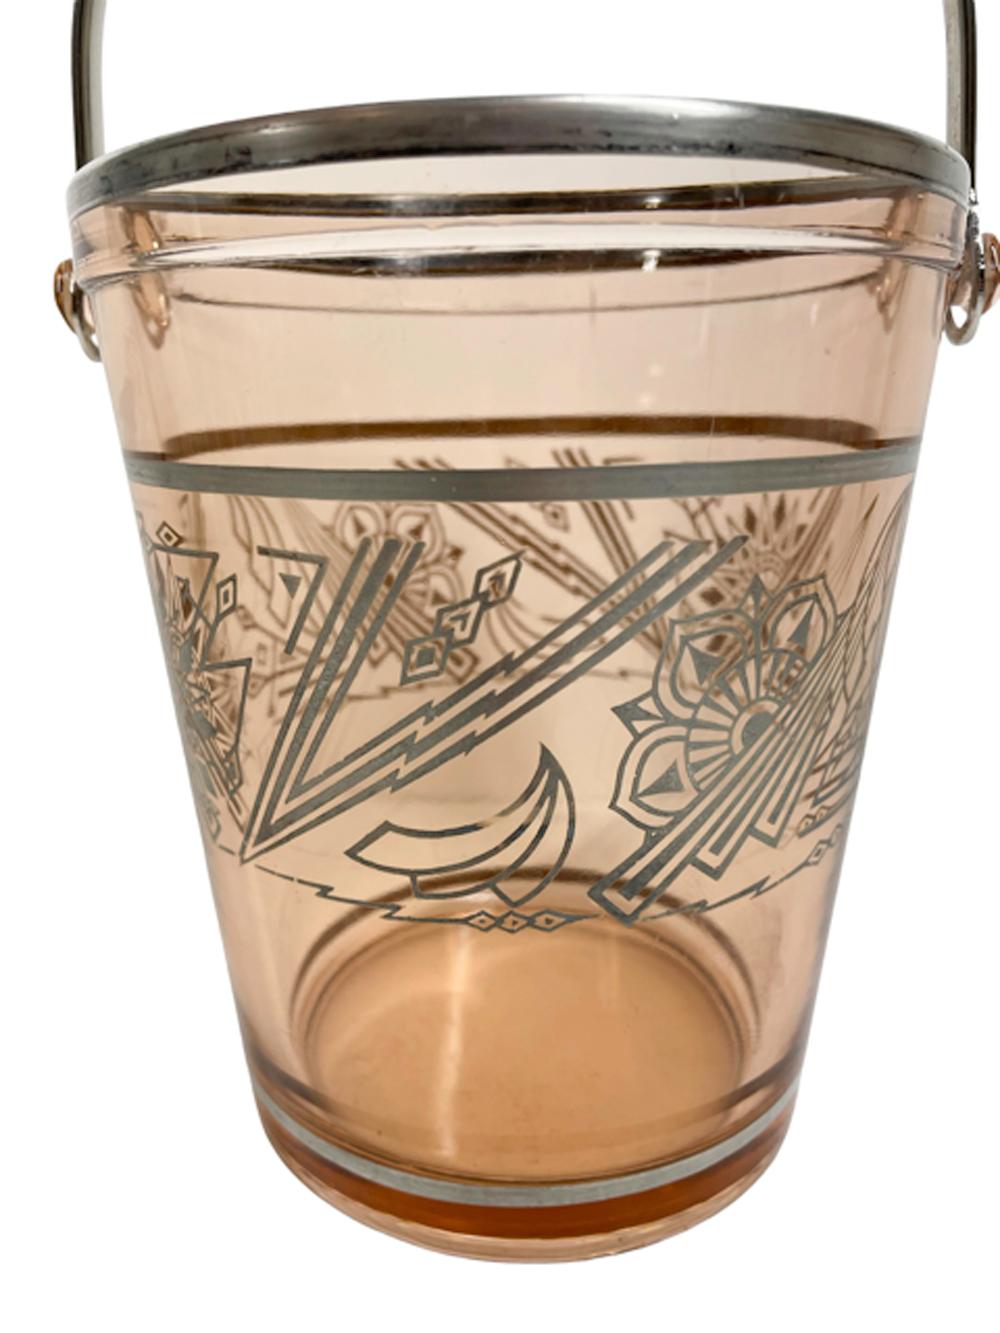 Art Deco pink glass ice bucket with tapered sides decorated with silver overlay stylized floral and geometric motifs of the Jazz Age, a metal bail handle attaches to the rim by means of molded glass lugs.